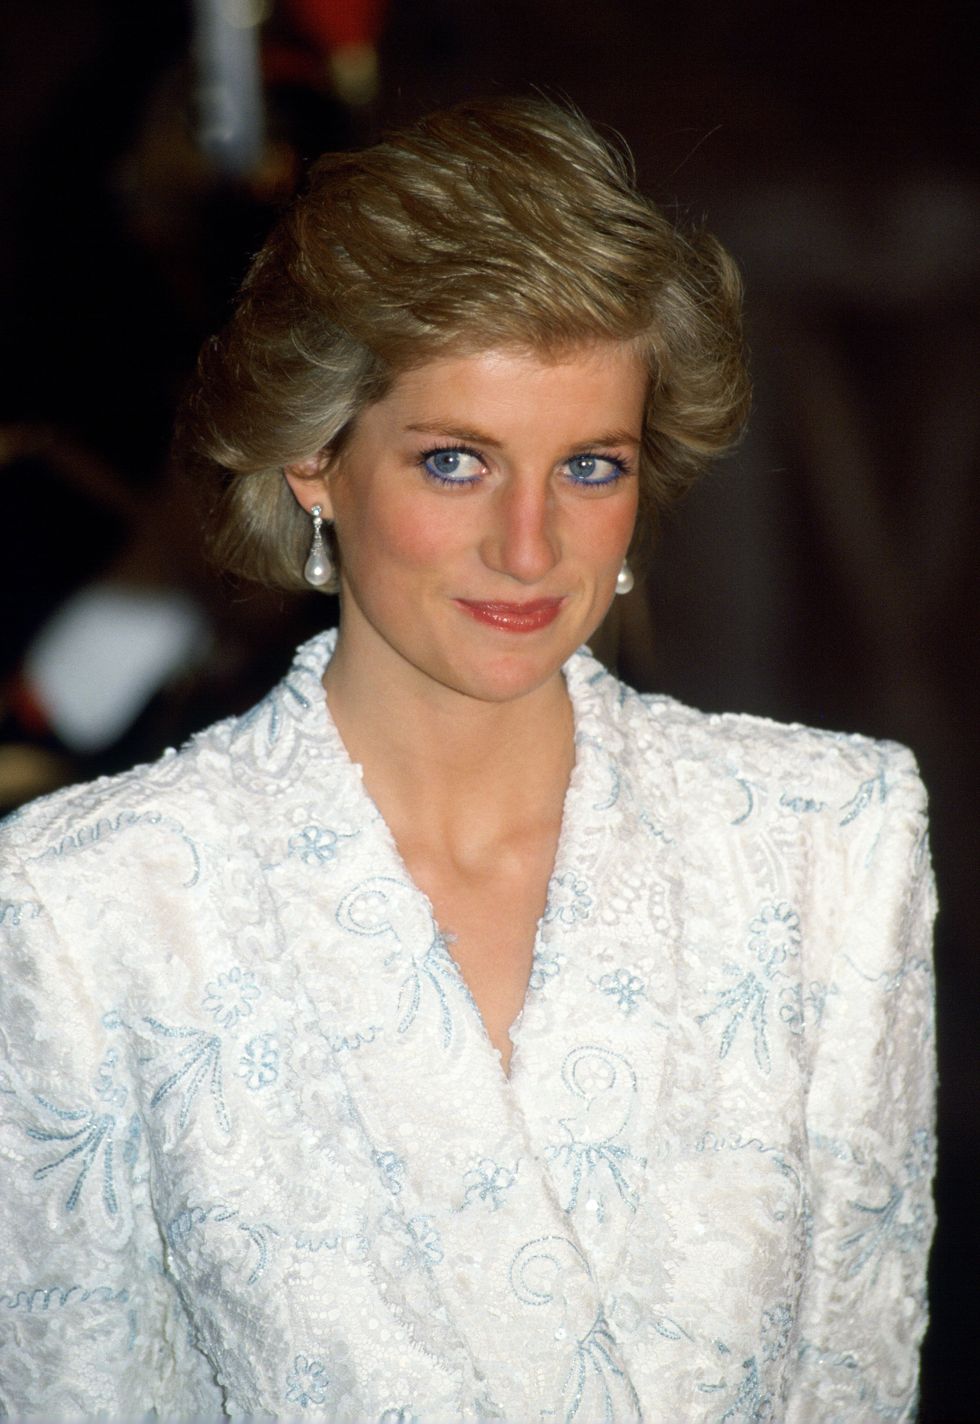 france   november 09  diana, princess  of wales, wearing a white and blue lace and sequin evening coat dress designed by catherine walker for a dinner at the chateau de chambord during her official visit to france  photo by tim graham photo library via getty images